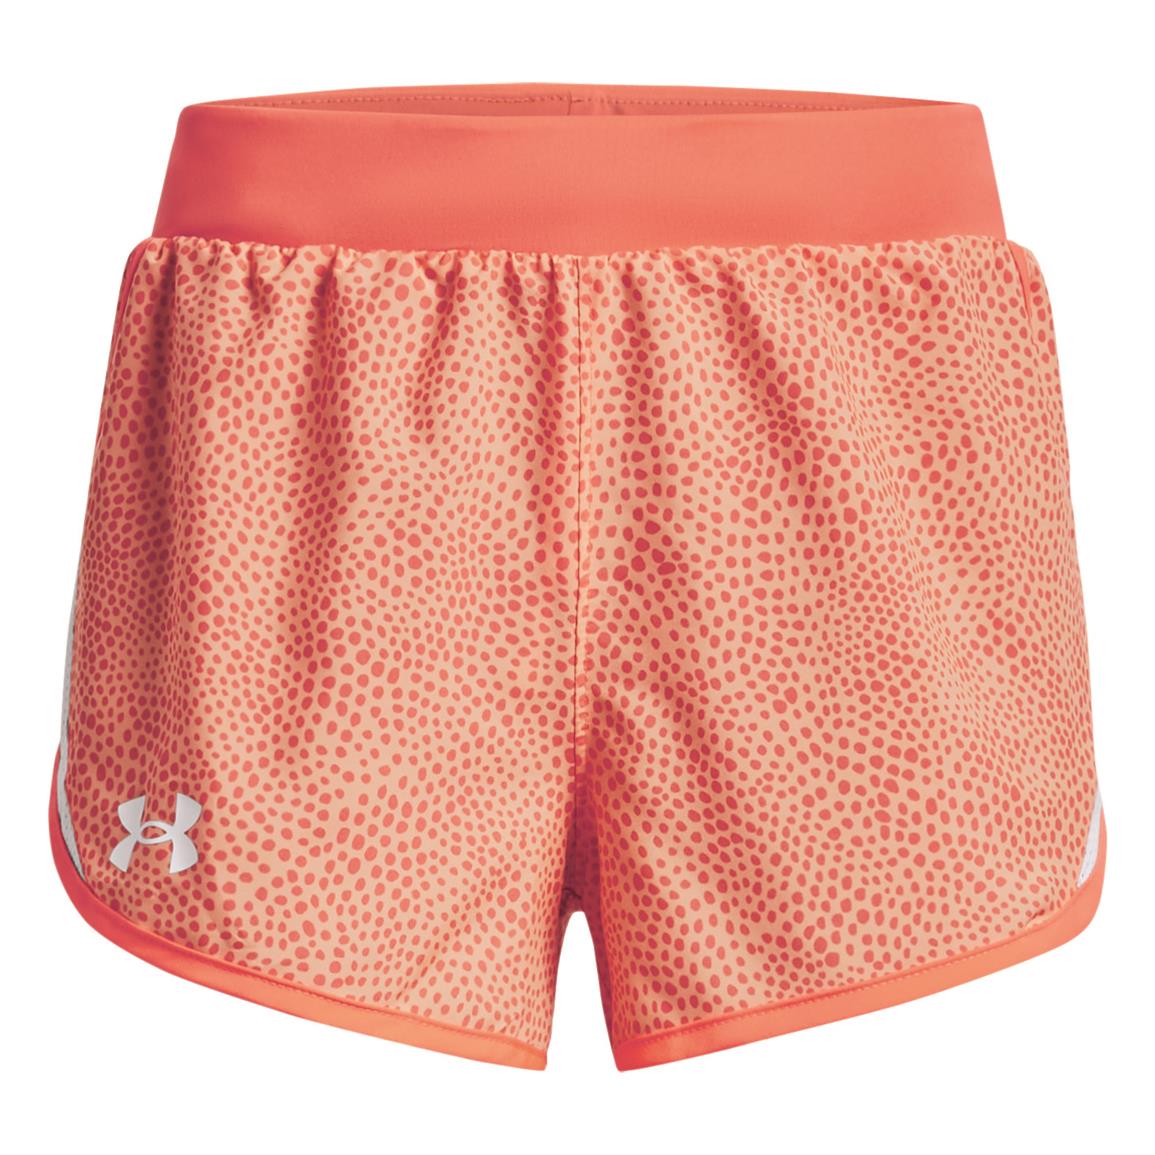 Under Armour Girls' Fly-By Printed Shorts, Orange Tropic/after Burn/white